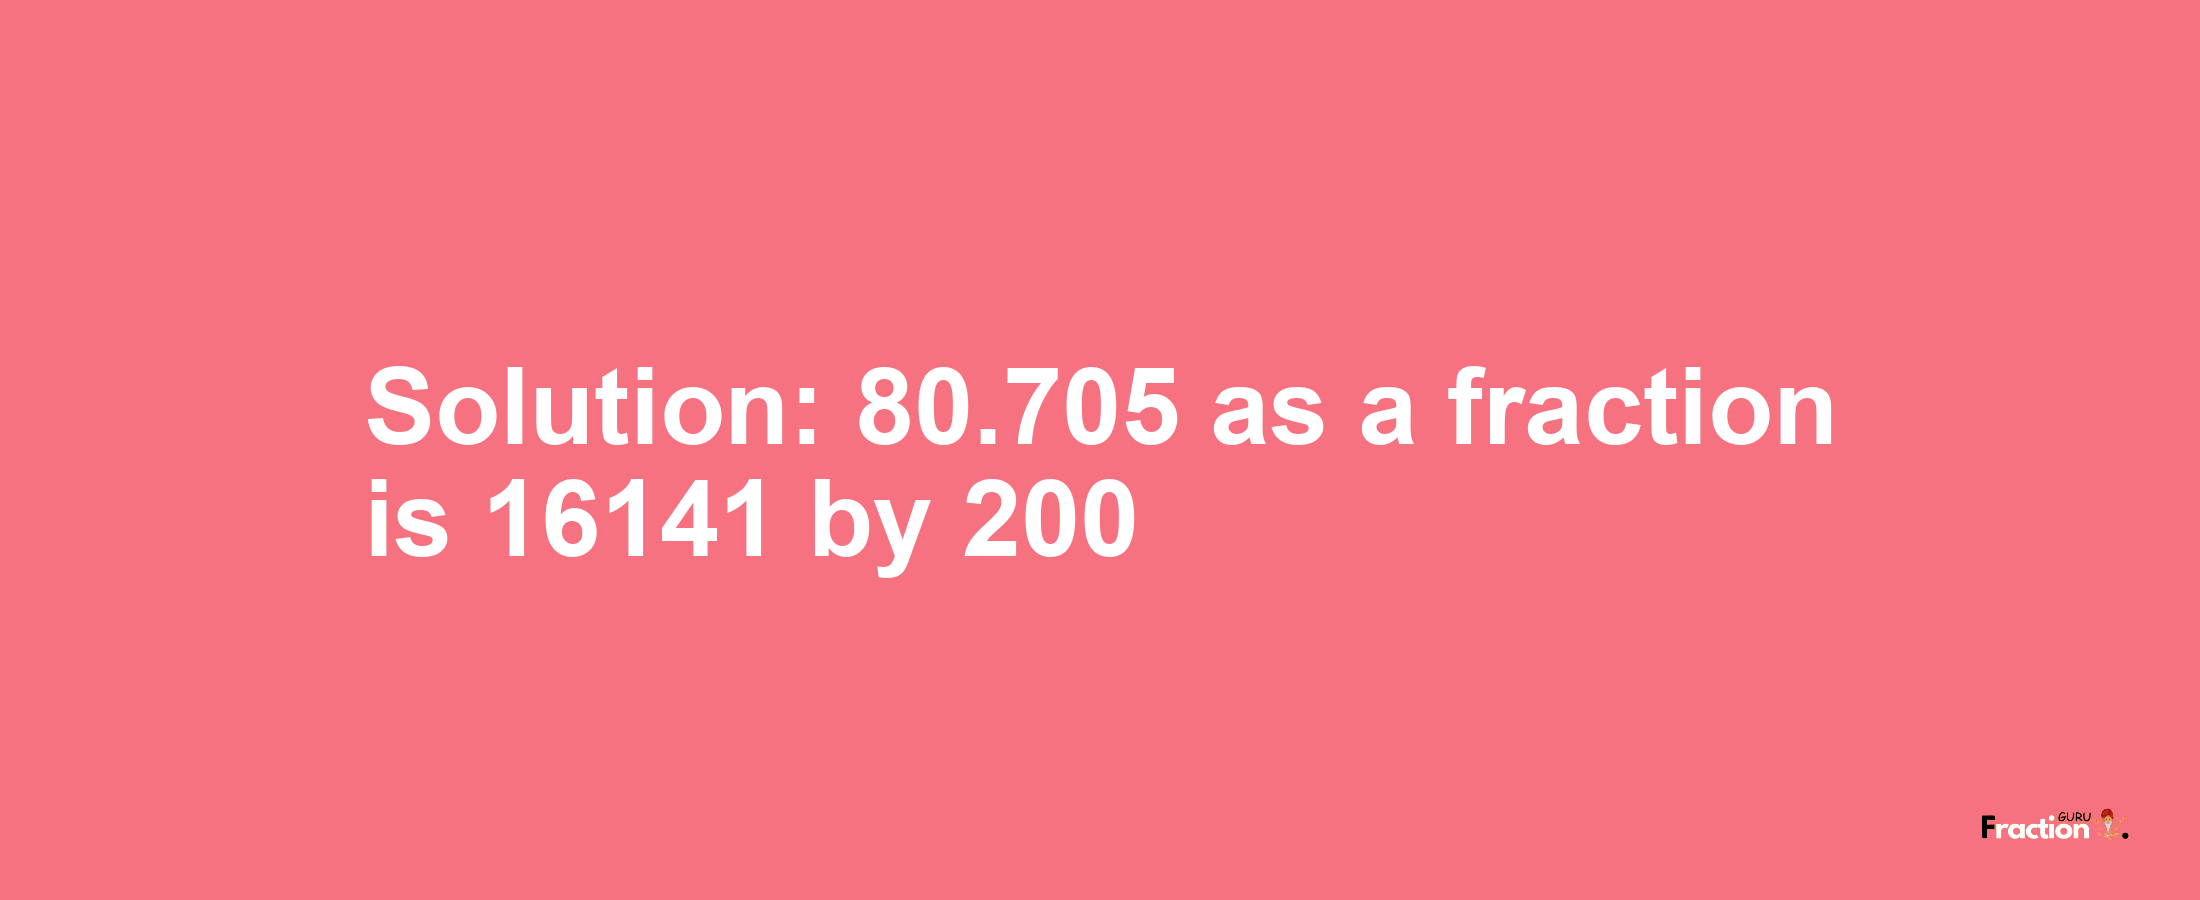 Solution:80.705 as a fraction is 16141/200